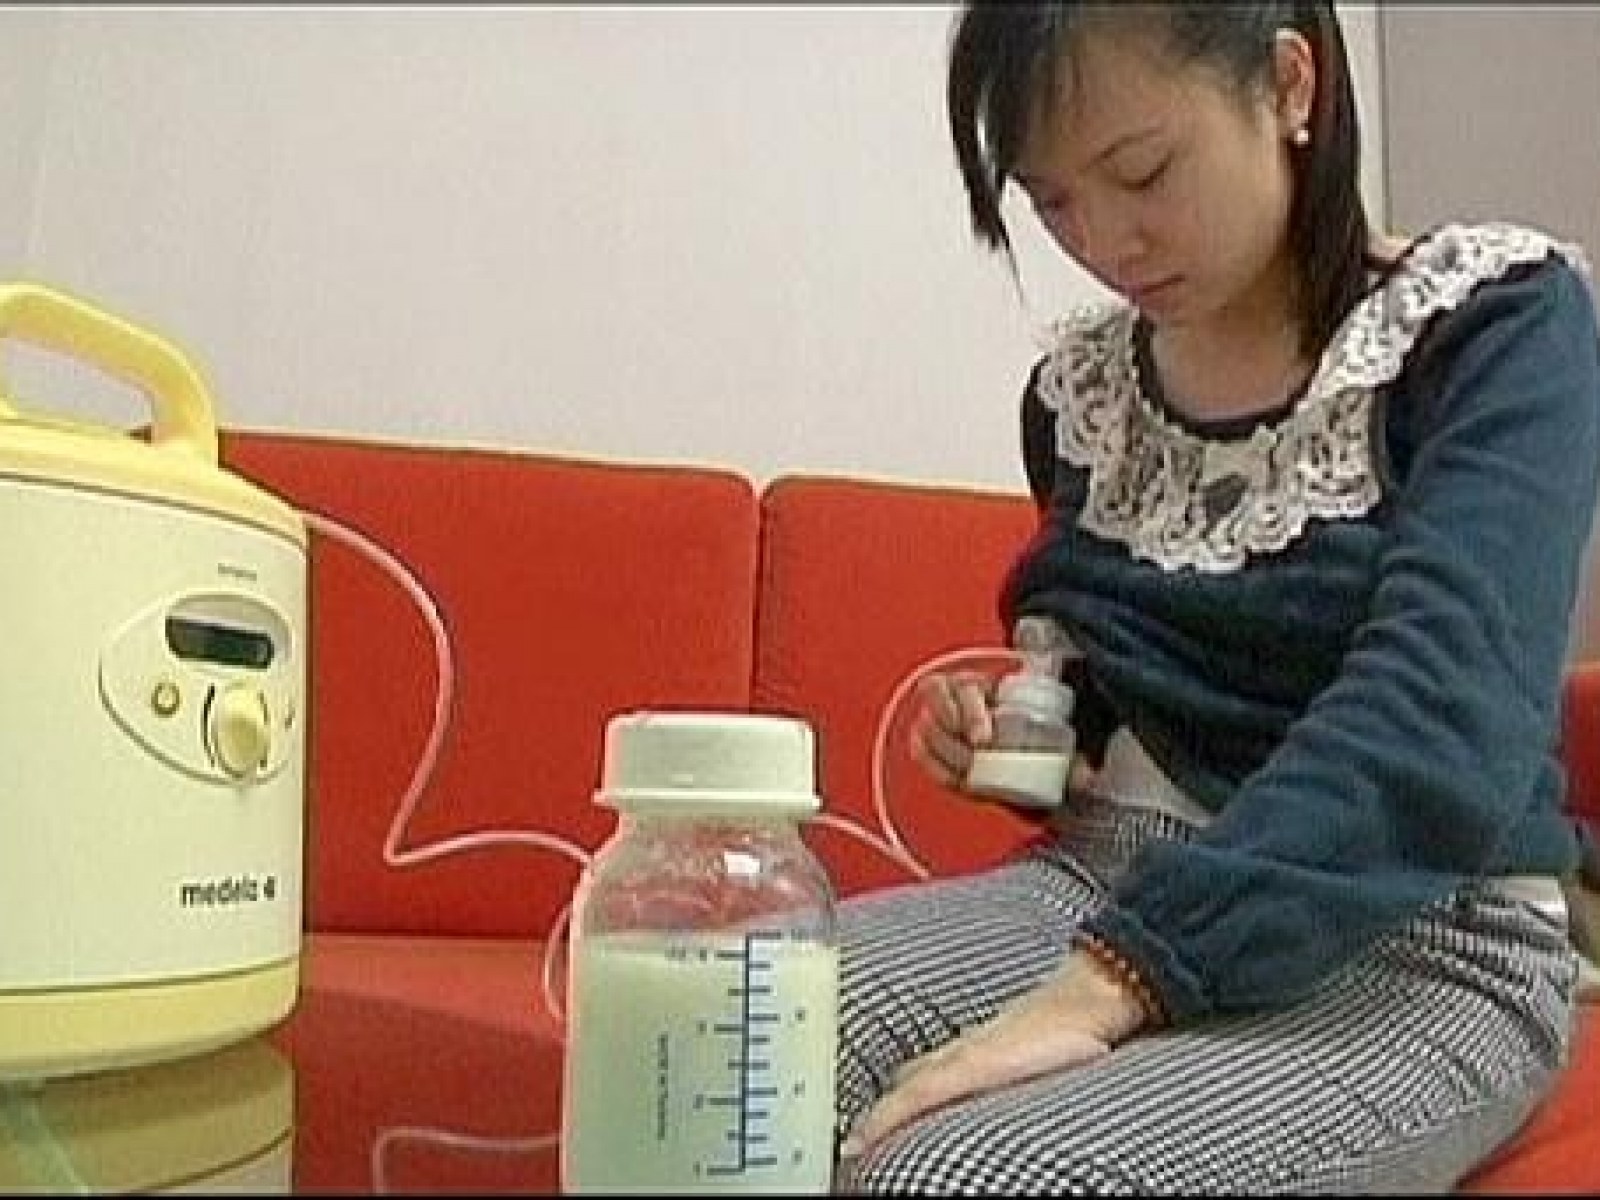 China's Super-Rich Prove Suckers for Young Mothers' Breast Milk